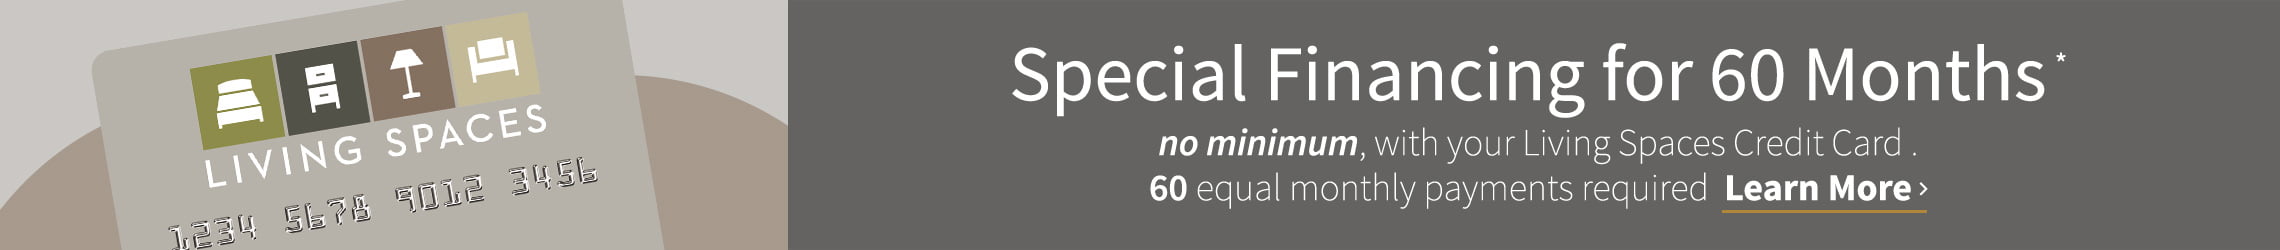 Special Financing for 60 Months* no minimum, with your Living Spaces Credit Card. 60 equal monthly payments required. Learn More>